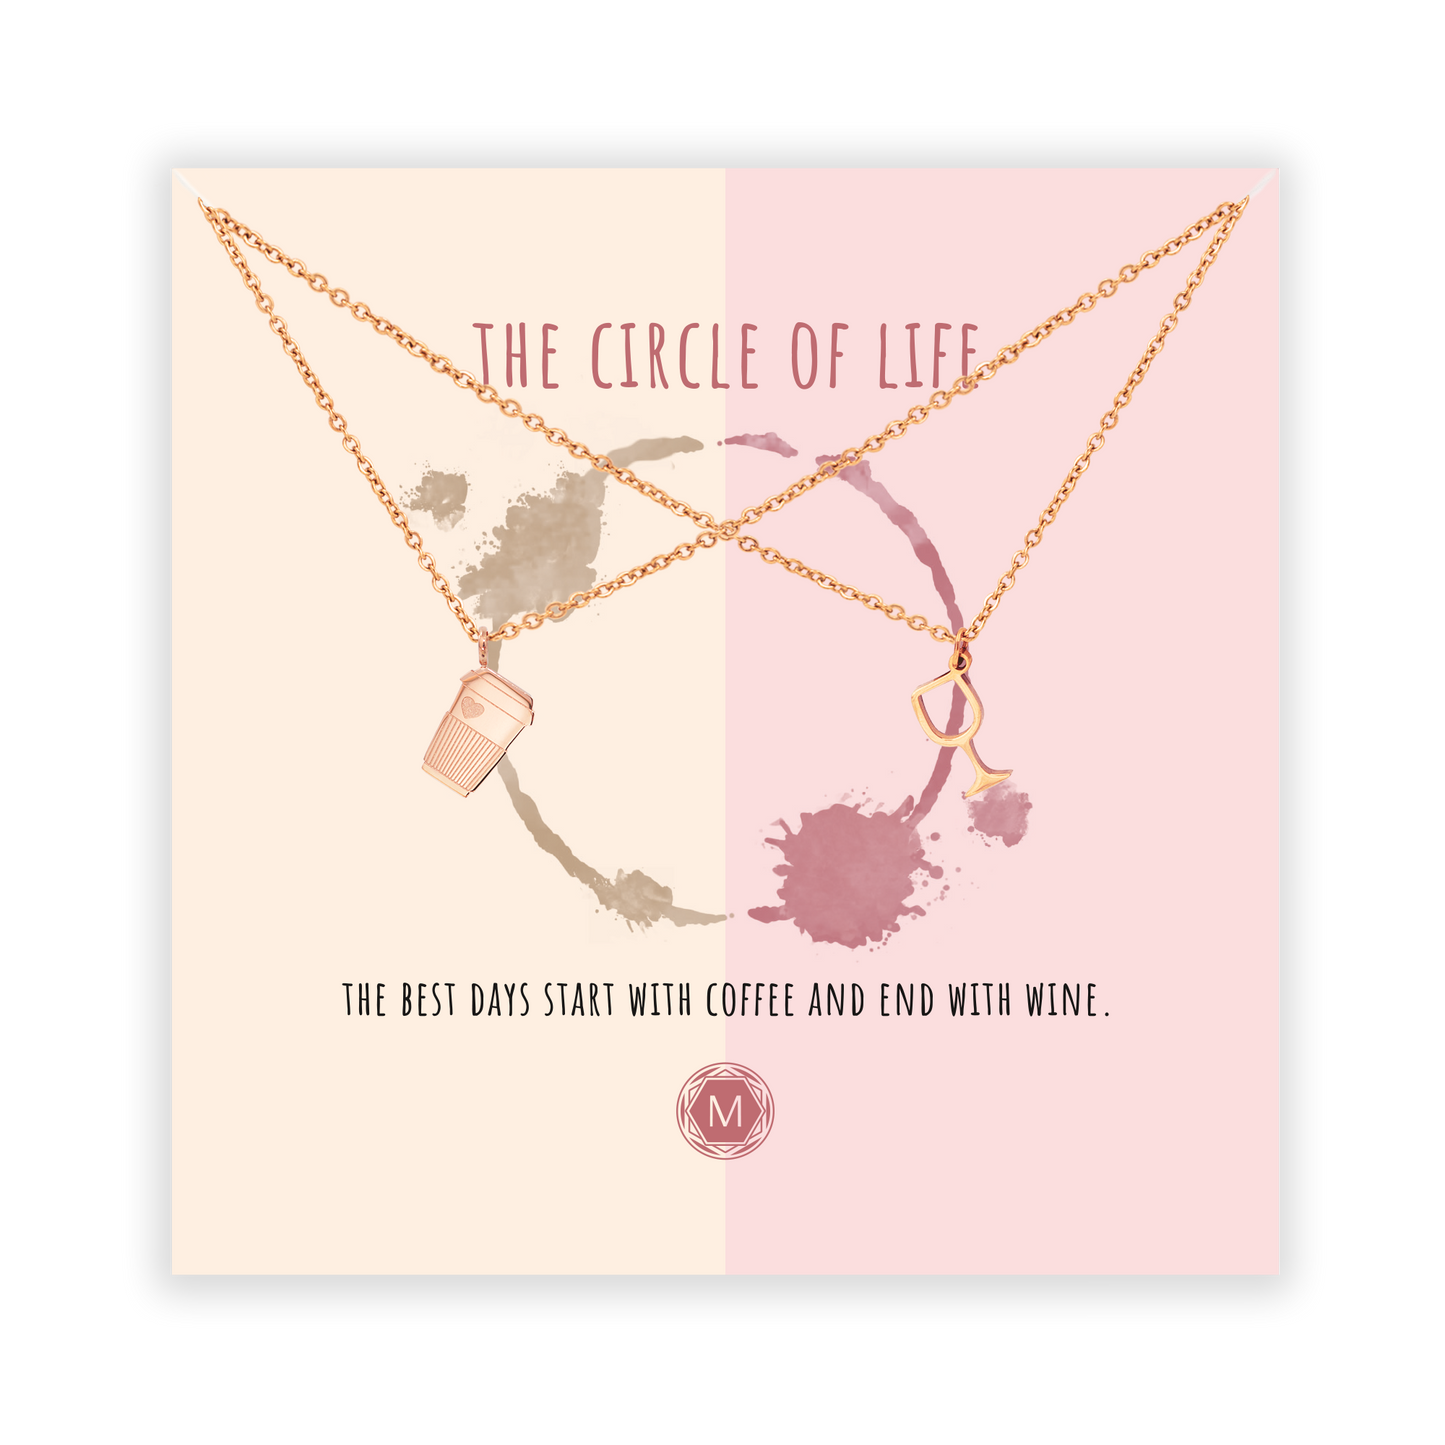 THE CIRCLE OF LIFE 2x Necklace